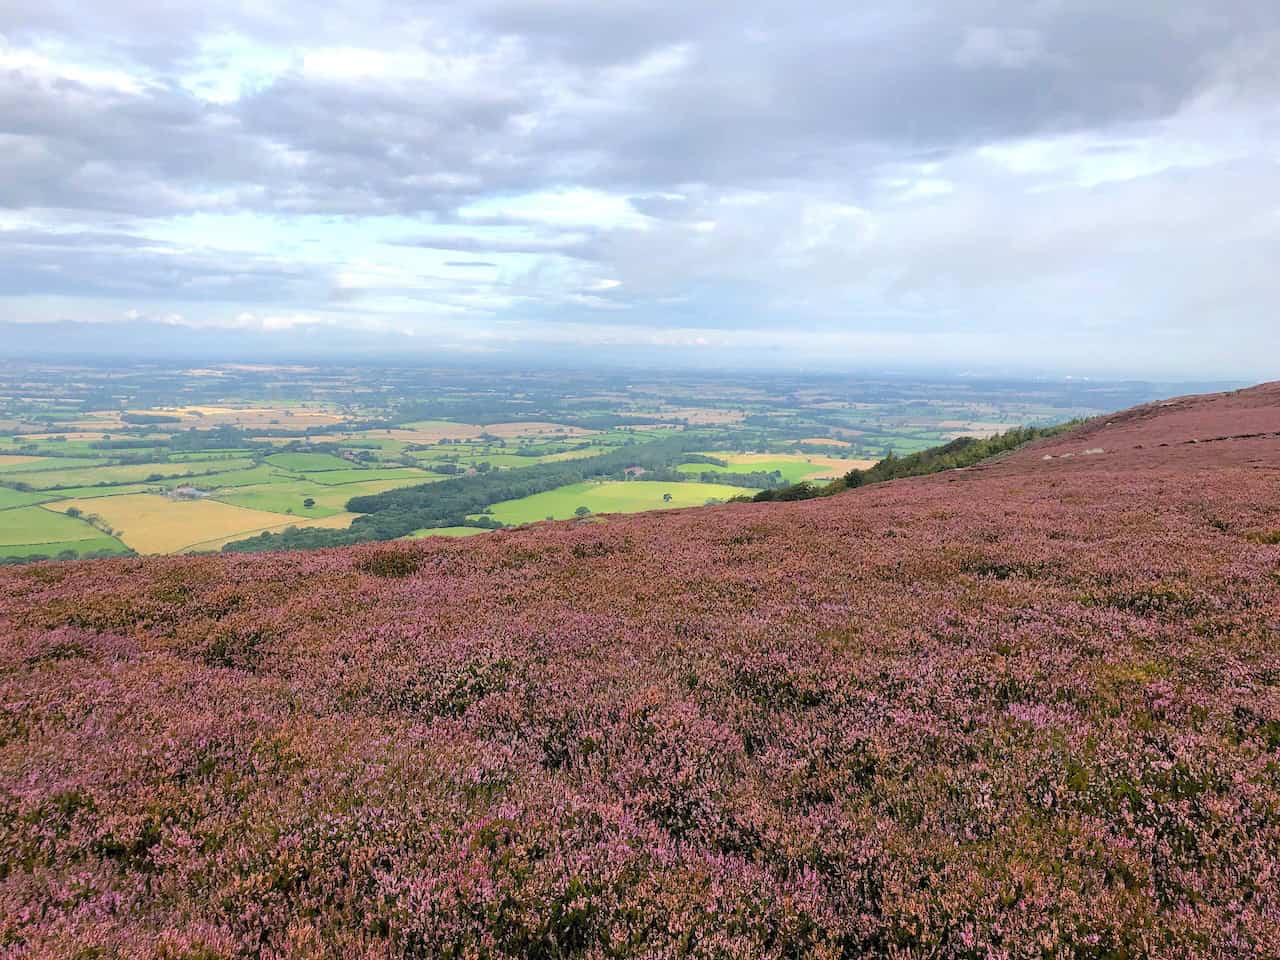 The view north-west from Ingleby Moor over the Tees Valley lowlands is expansive and impressive.